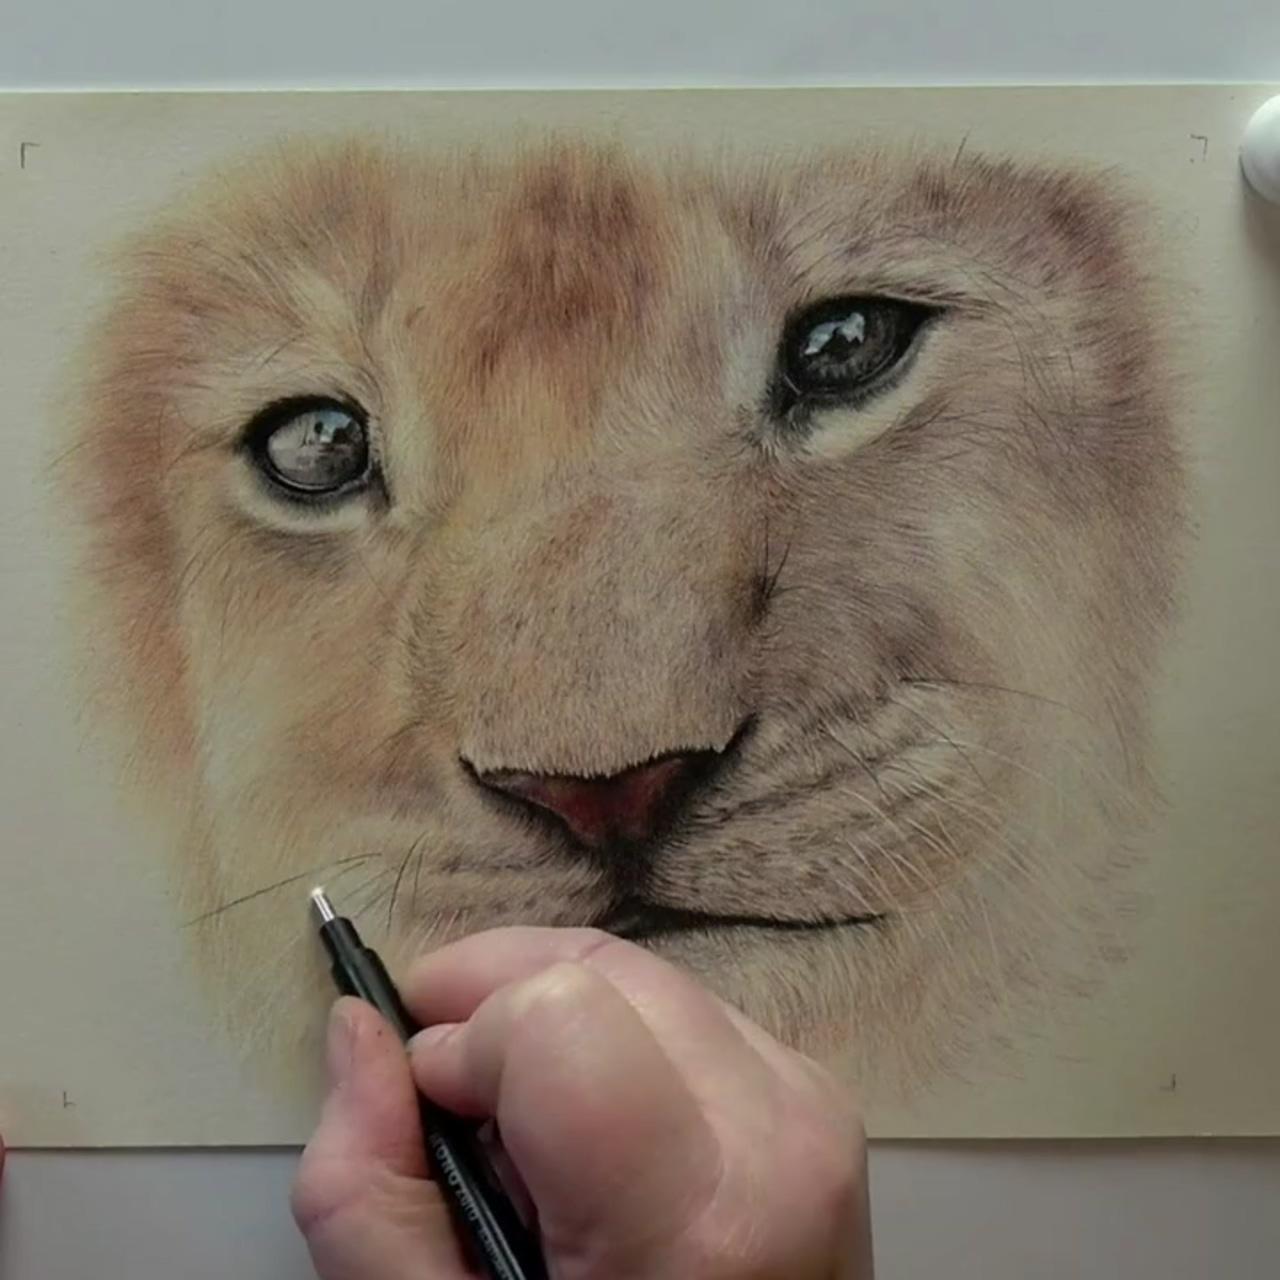 Learn to draw realistic animals in coloured pencil, bonny snowdon academy | learn to paint realistic feathers using watercolor and by working in layers